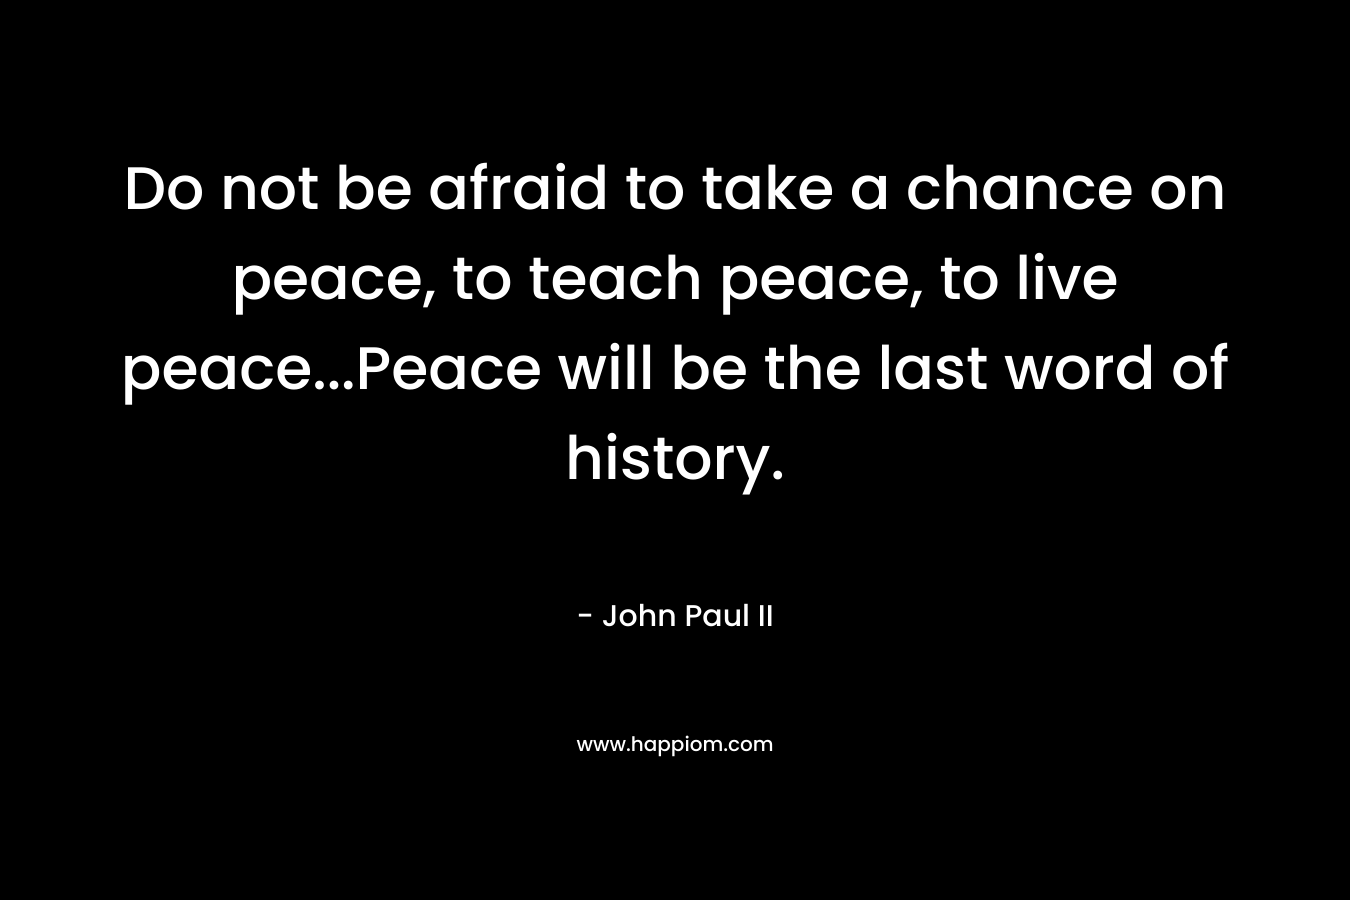 Do not be afraid to take a chance on peace, to teach peace, to live peace...Peace will be the last word of history.